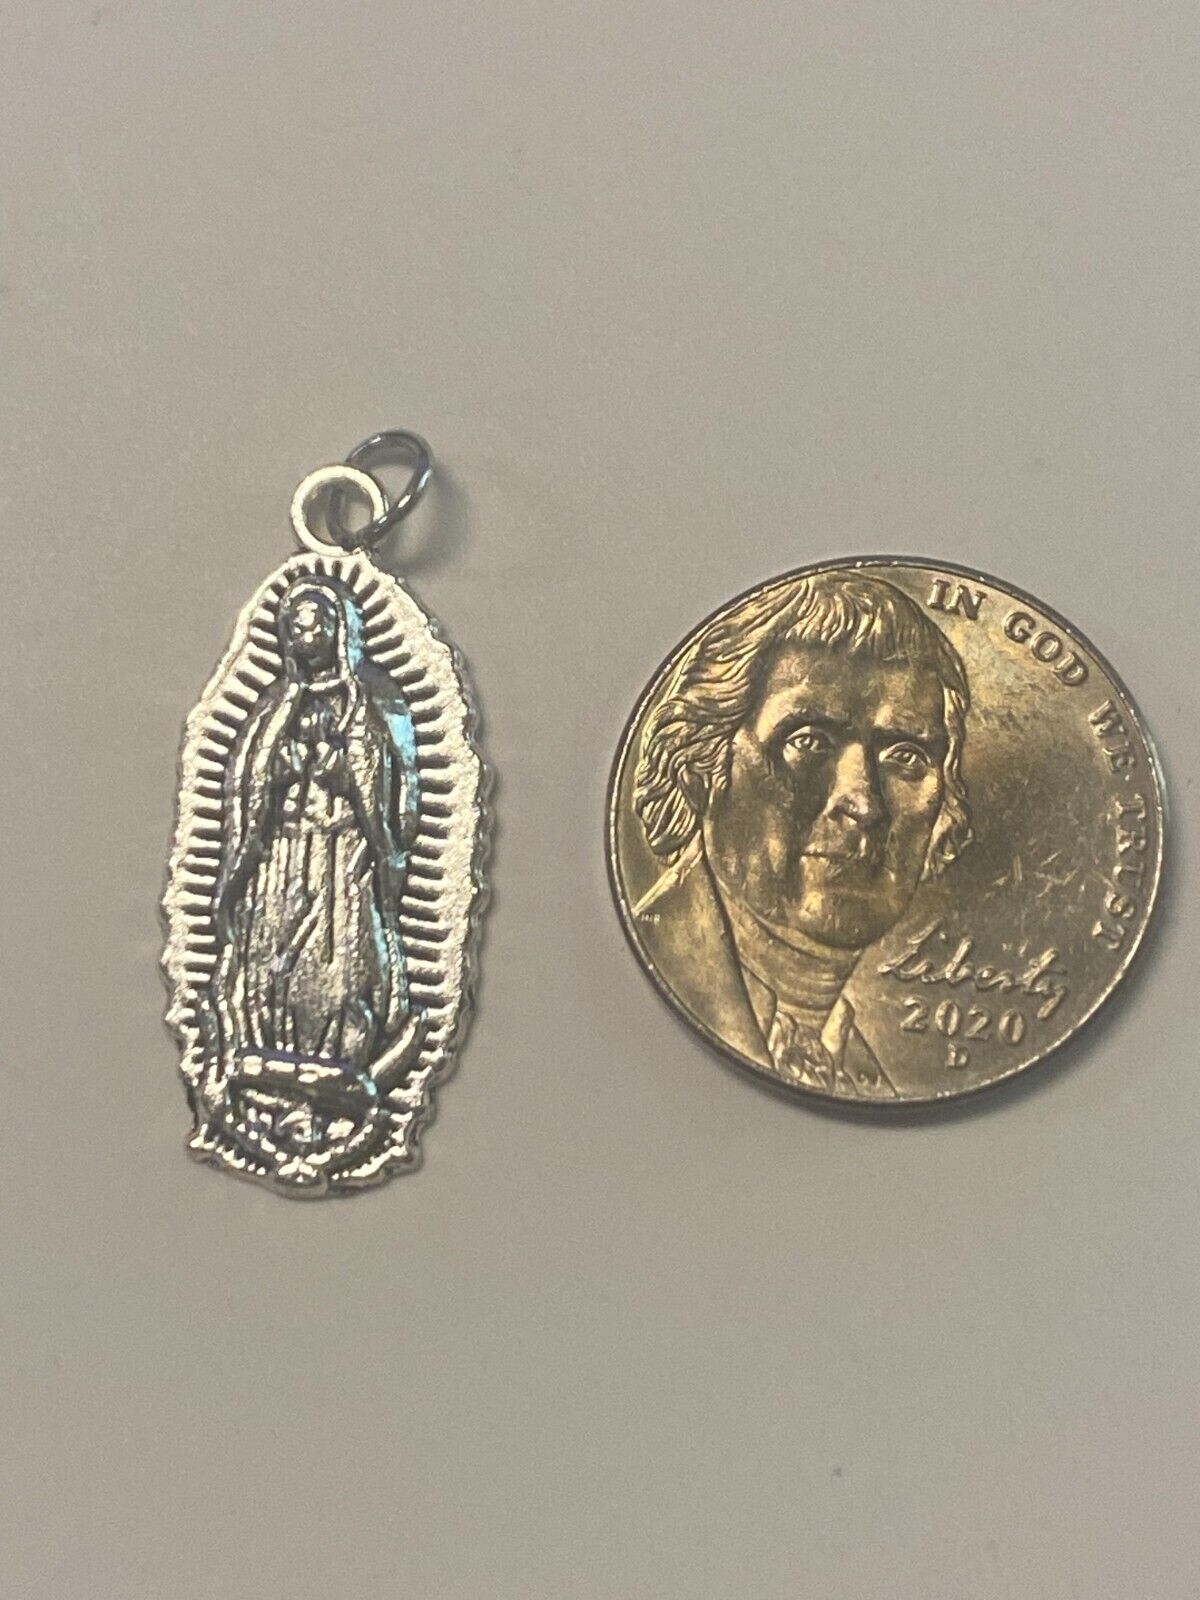 Our Lady of Guadalupe Silver Plated 1"  Medal, New #2